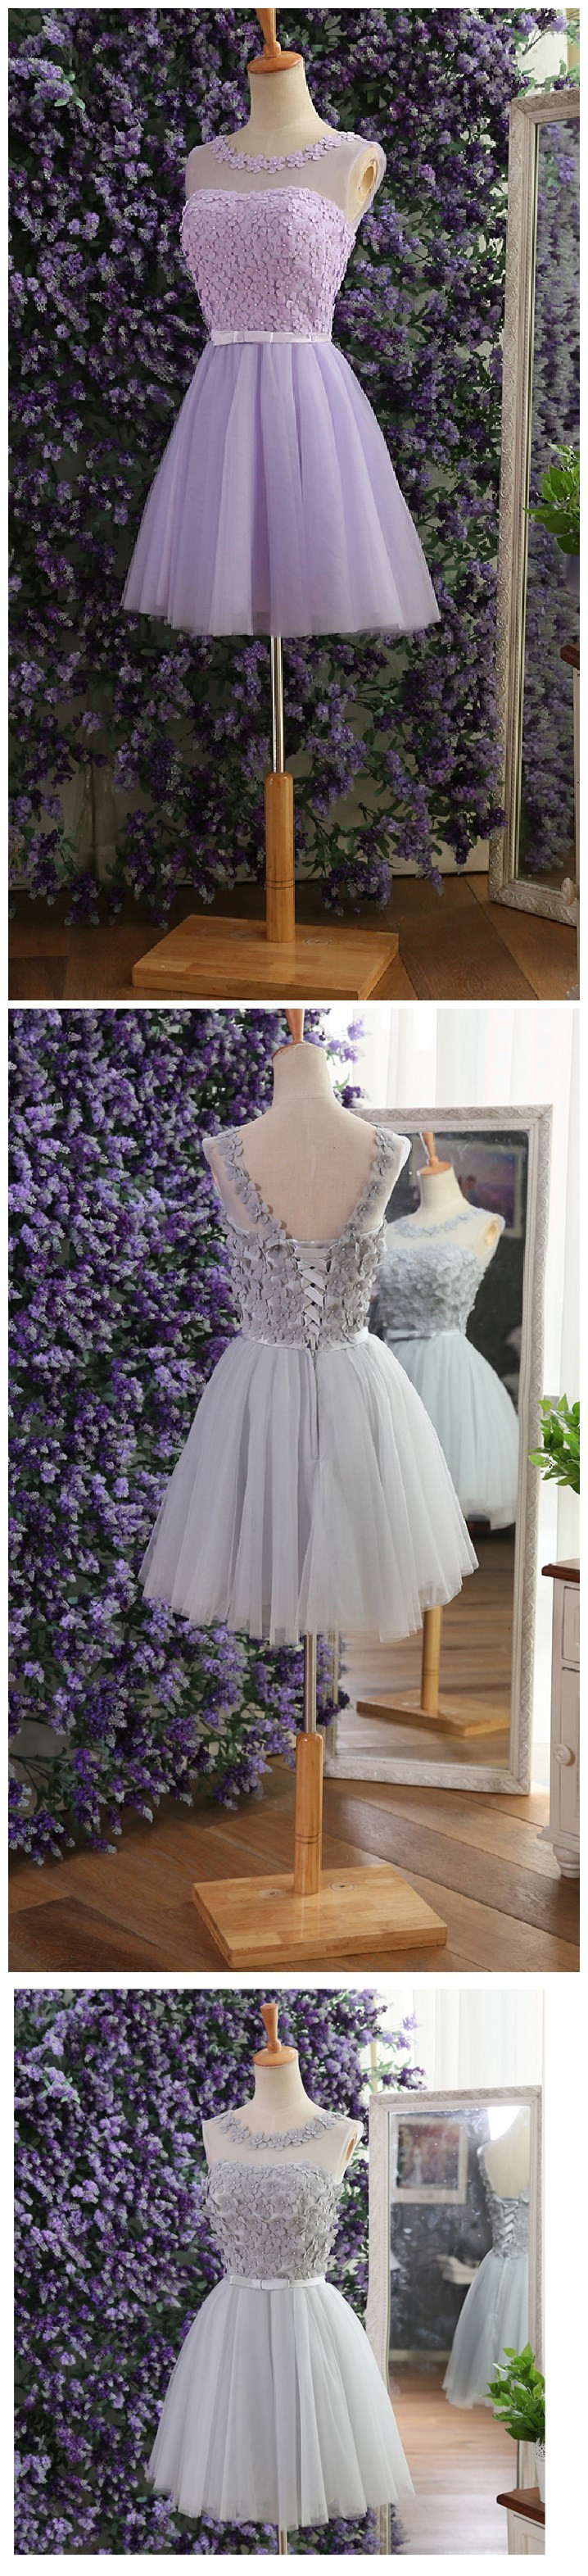 Elegant Gray Prom Dresses,tulle Flower Beaded Prom Dresses,short Prom Dresses,short A-line Prom Dresses,party Evening Gown Custom,homecoming